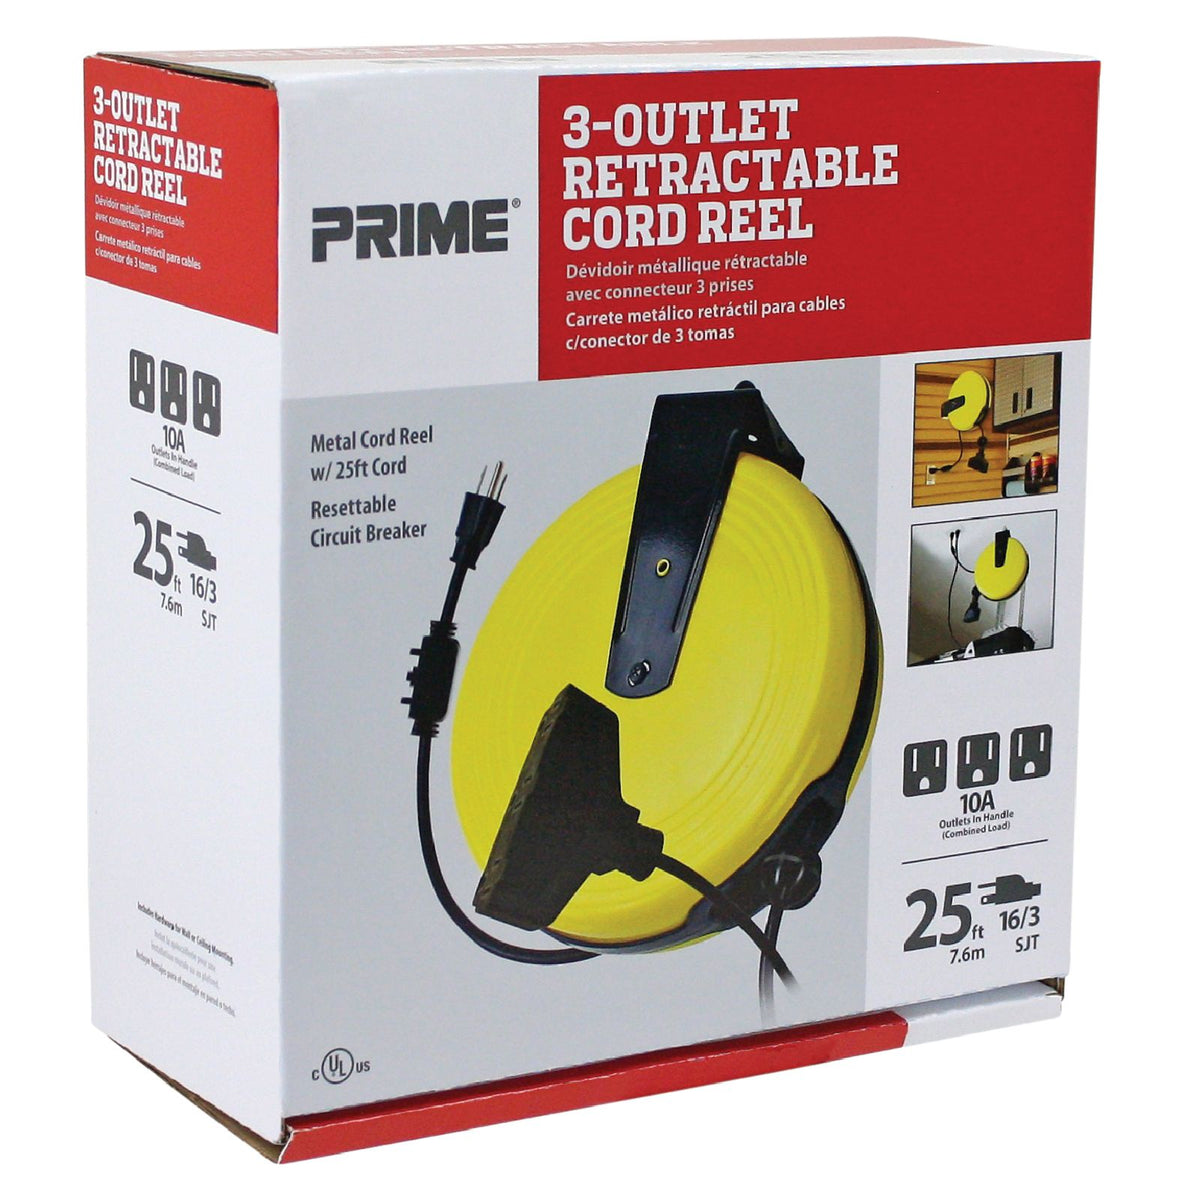  Prime CR003000 Portable Cord Reel with Metal Stand